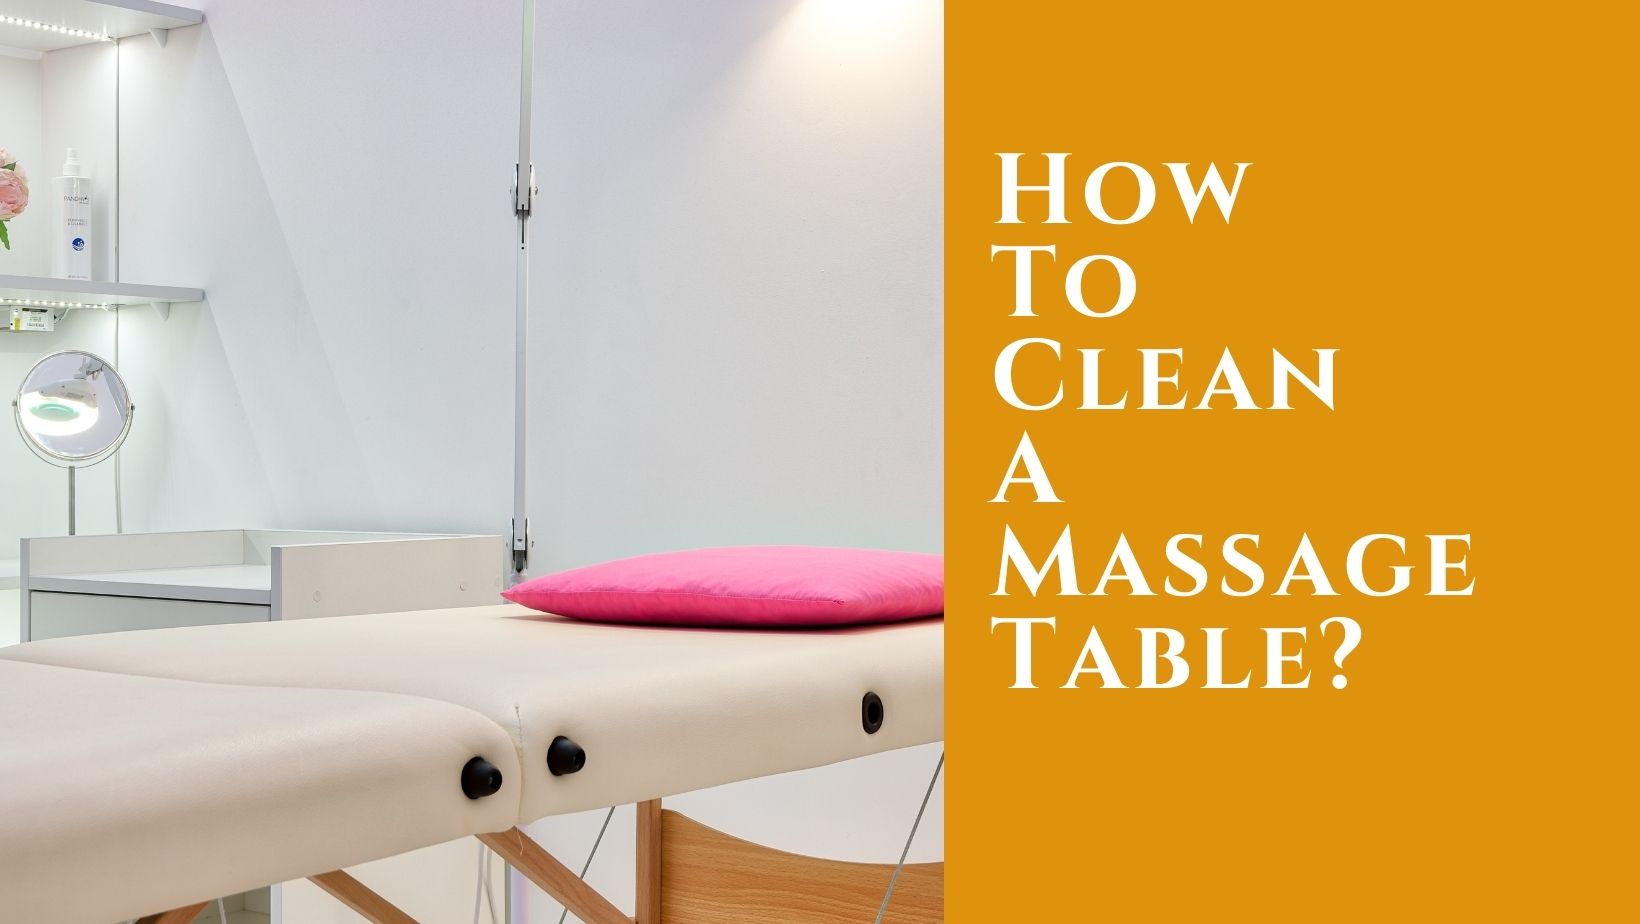 How To Clean A Massage Table